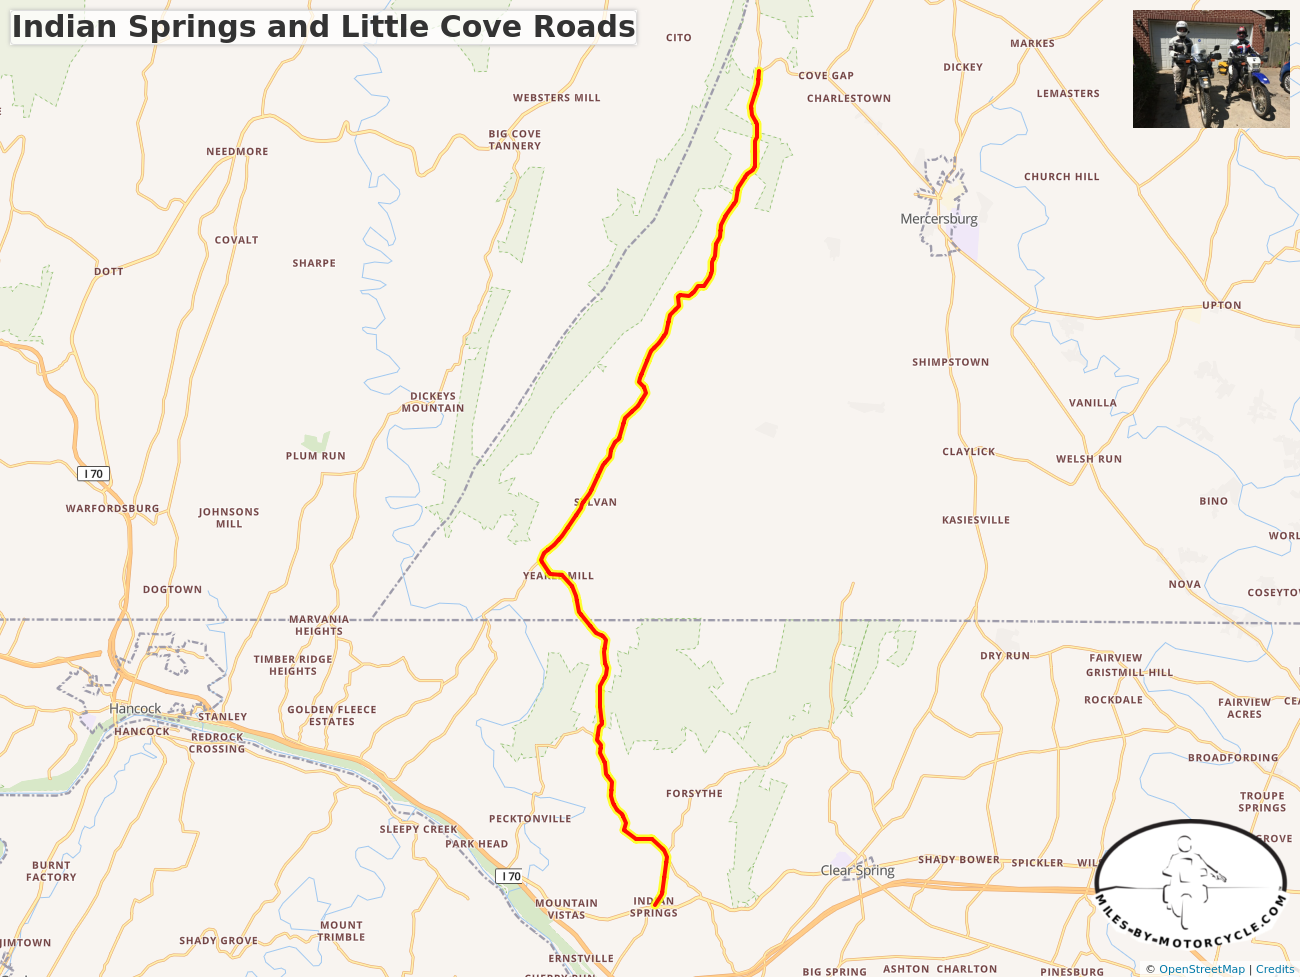 Indian Springs and Little Cove Roads